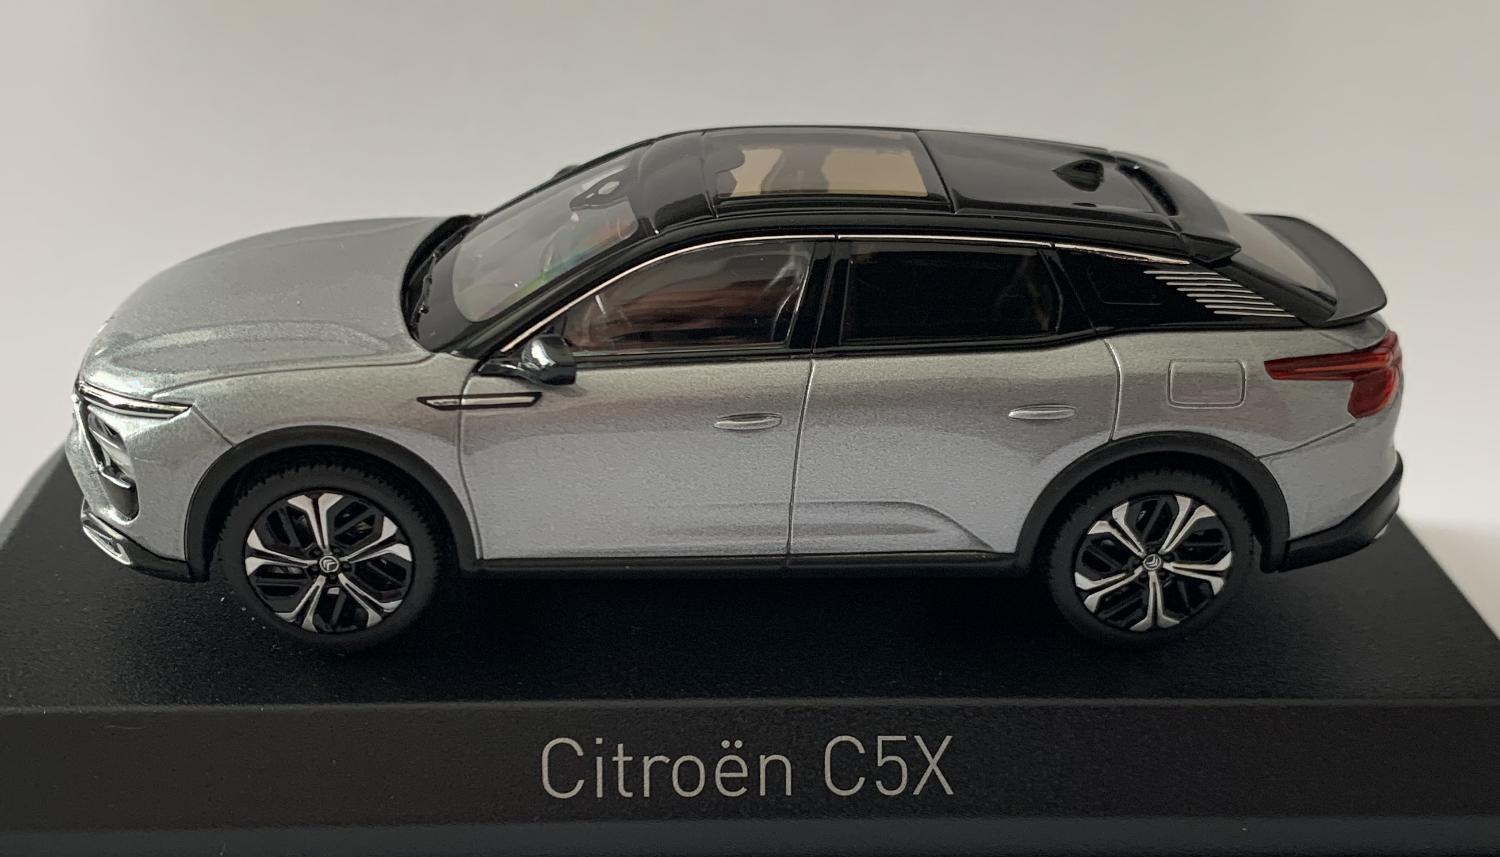 An excellent scale model of a Citroen C5X decorated in artense grey with black panoramic roof, rears spoilers, tinted windows, black and silver wheels